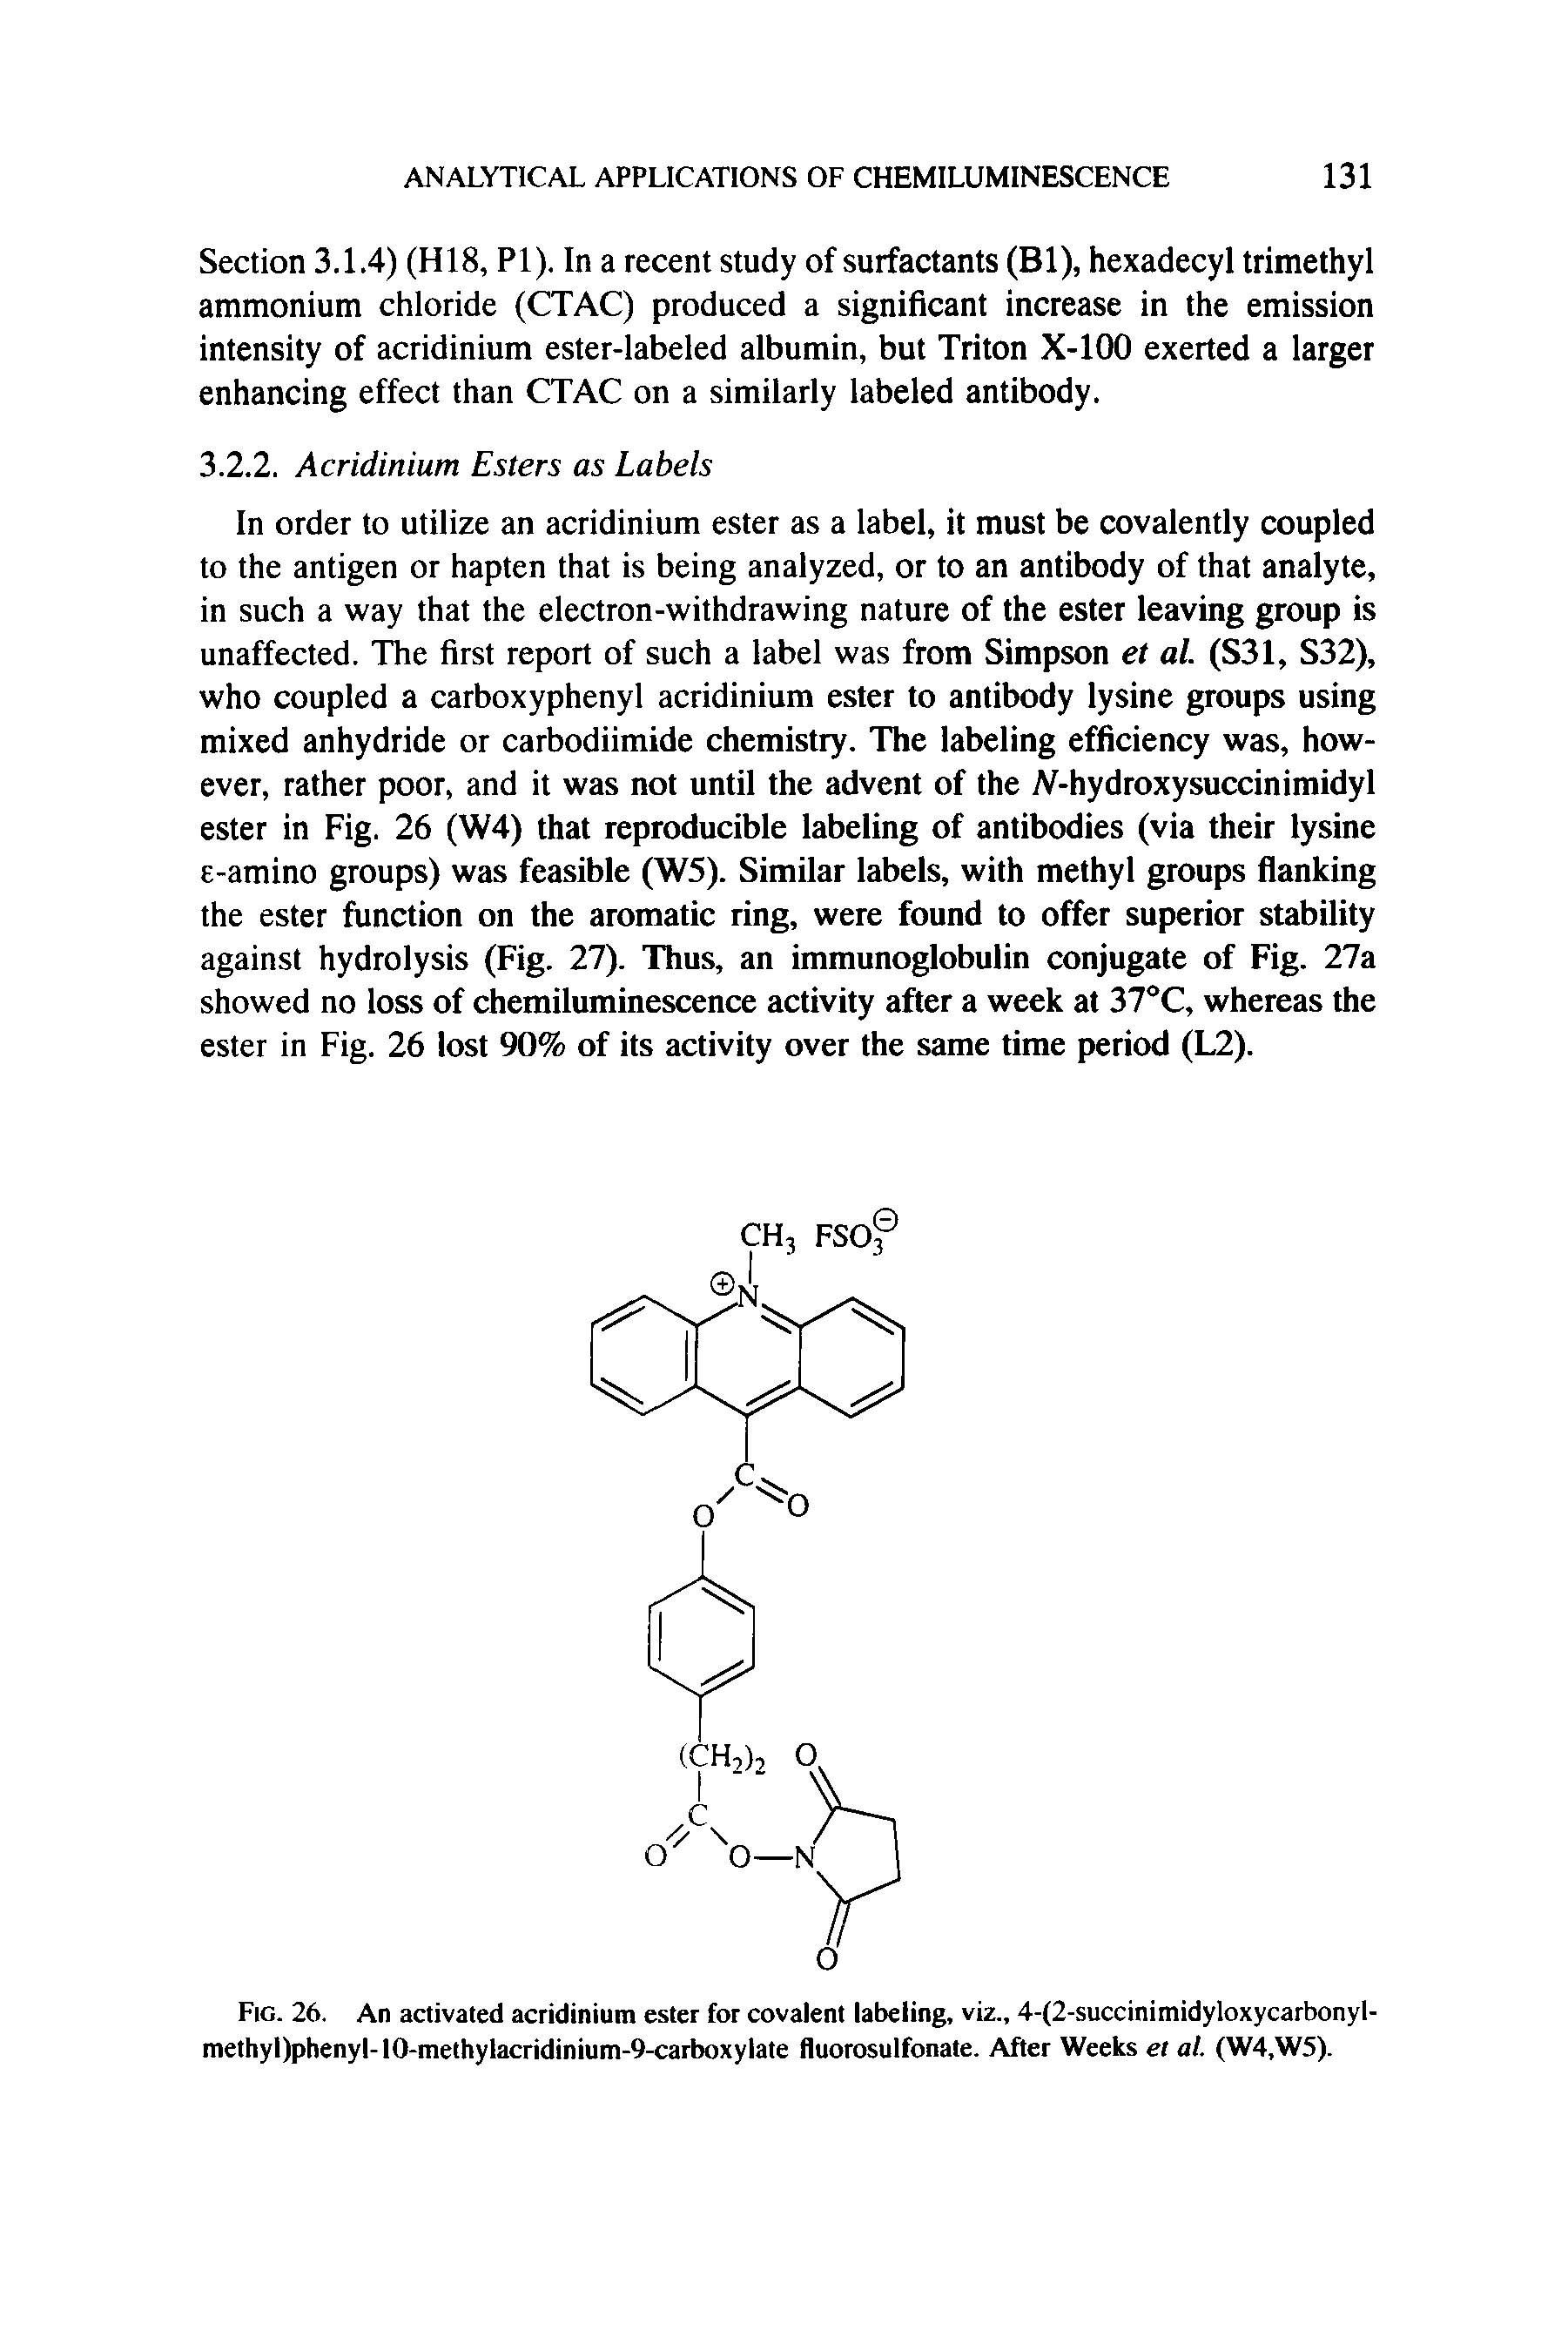 Fig. 26. An activated acridinium ester for covalent labeling, viz., 4-(2-succinimidyloxycarbonyl-methyl)phenyl-IO-methylacridinium-9-carboxylate fluorosulfonate. After Weeks et al. (W4,W5).